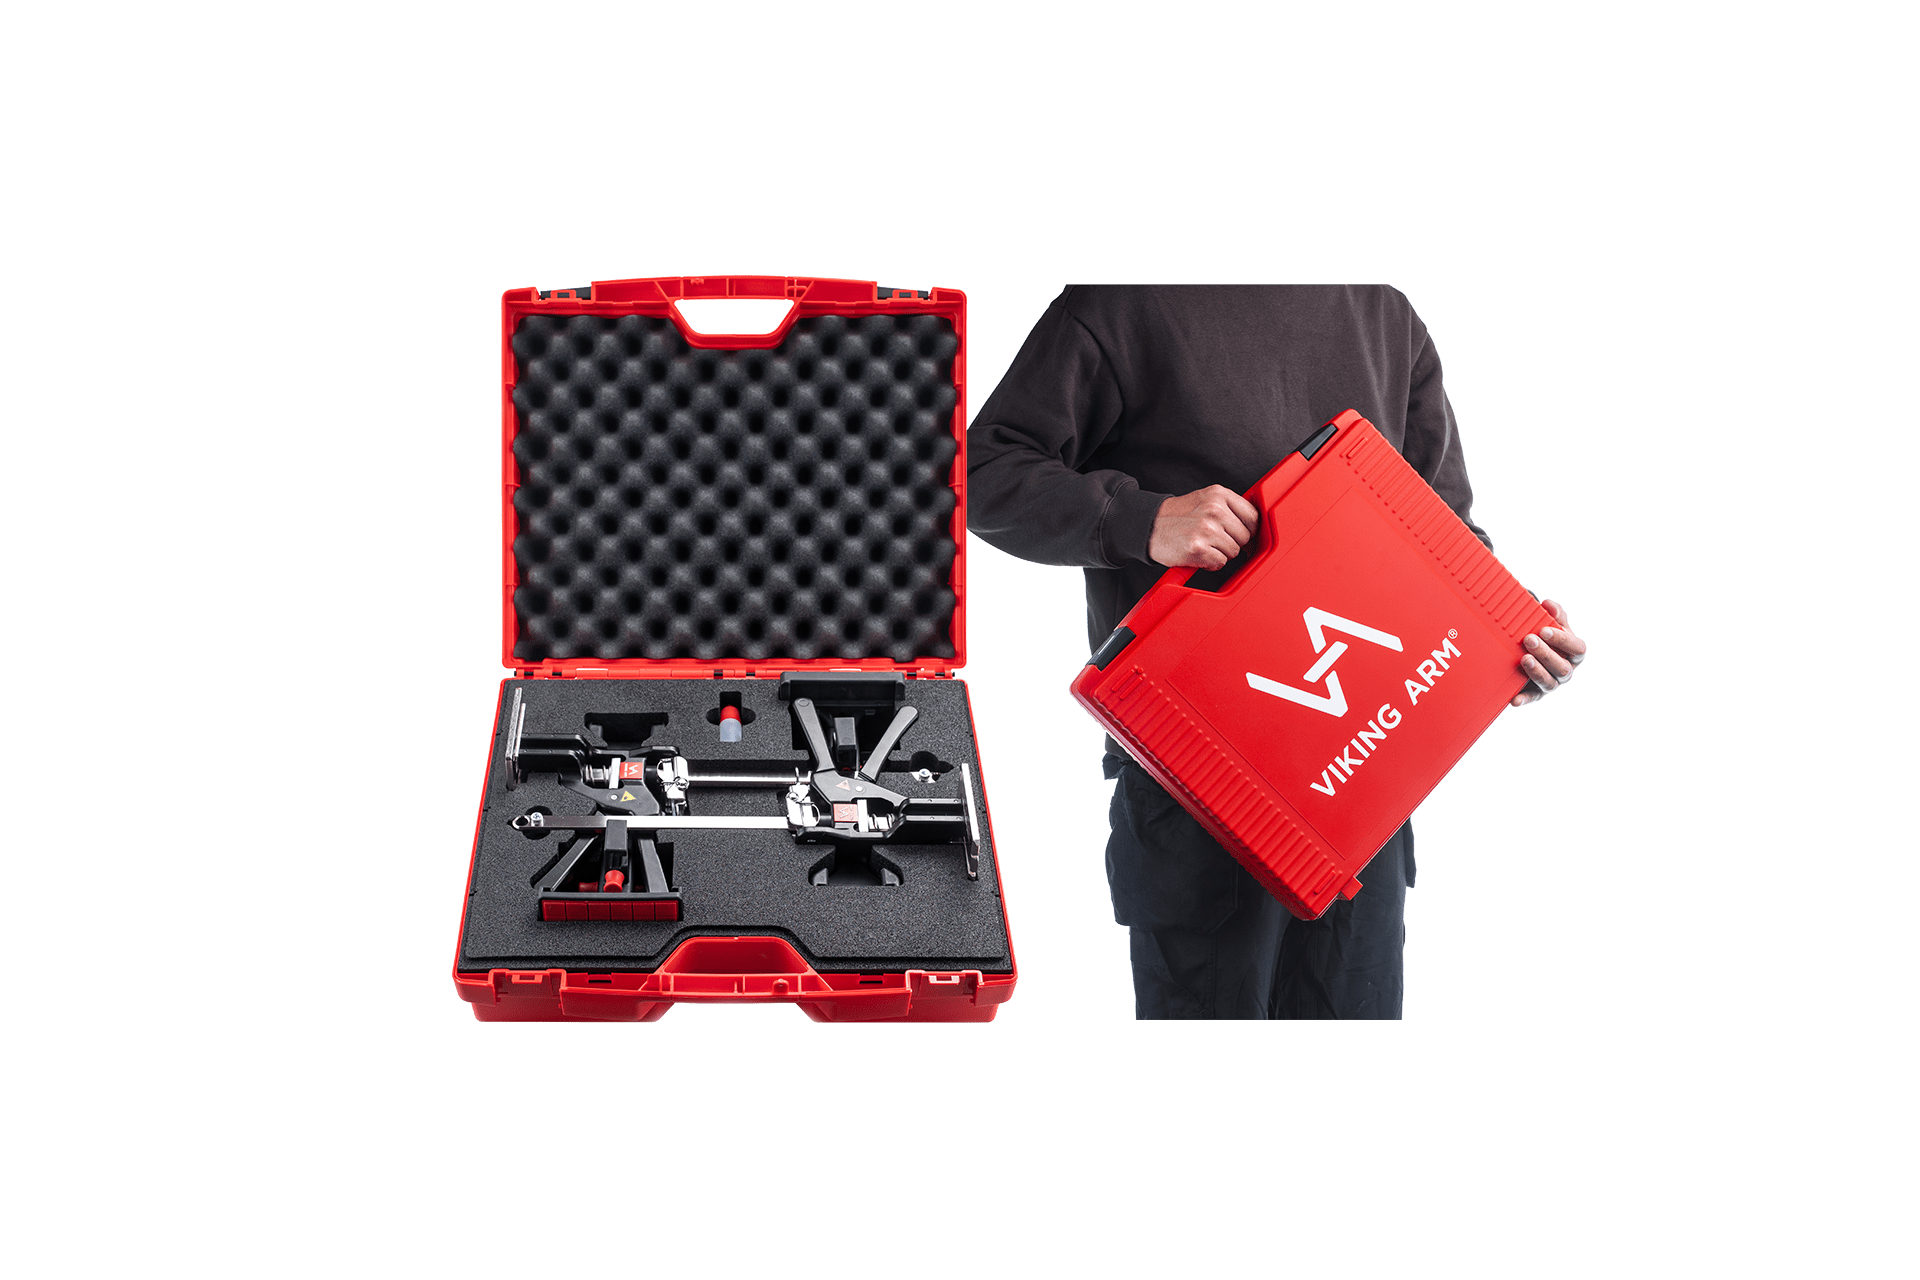 Comprehensive Cabinet Installation System featuring 2 Viking Arms, 2 Cabinet Installation Kits with extenders for up to 60.5 cm/23.8 inches, Base Pads, and Lifting Pads. The kit is housed in a robust tool case (W437 mm x H379 mm x D160 mm) with hard-cut quality foam inserts and softer protective foam in the lid, weighing 6.1 kg/13.5 lb with tools.